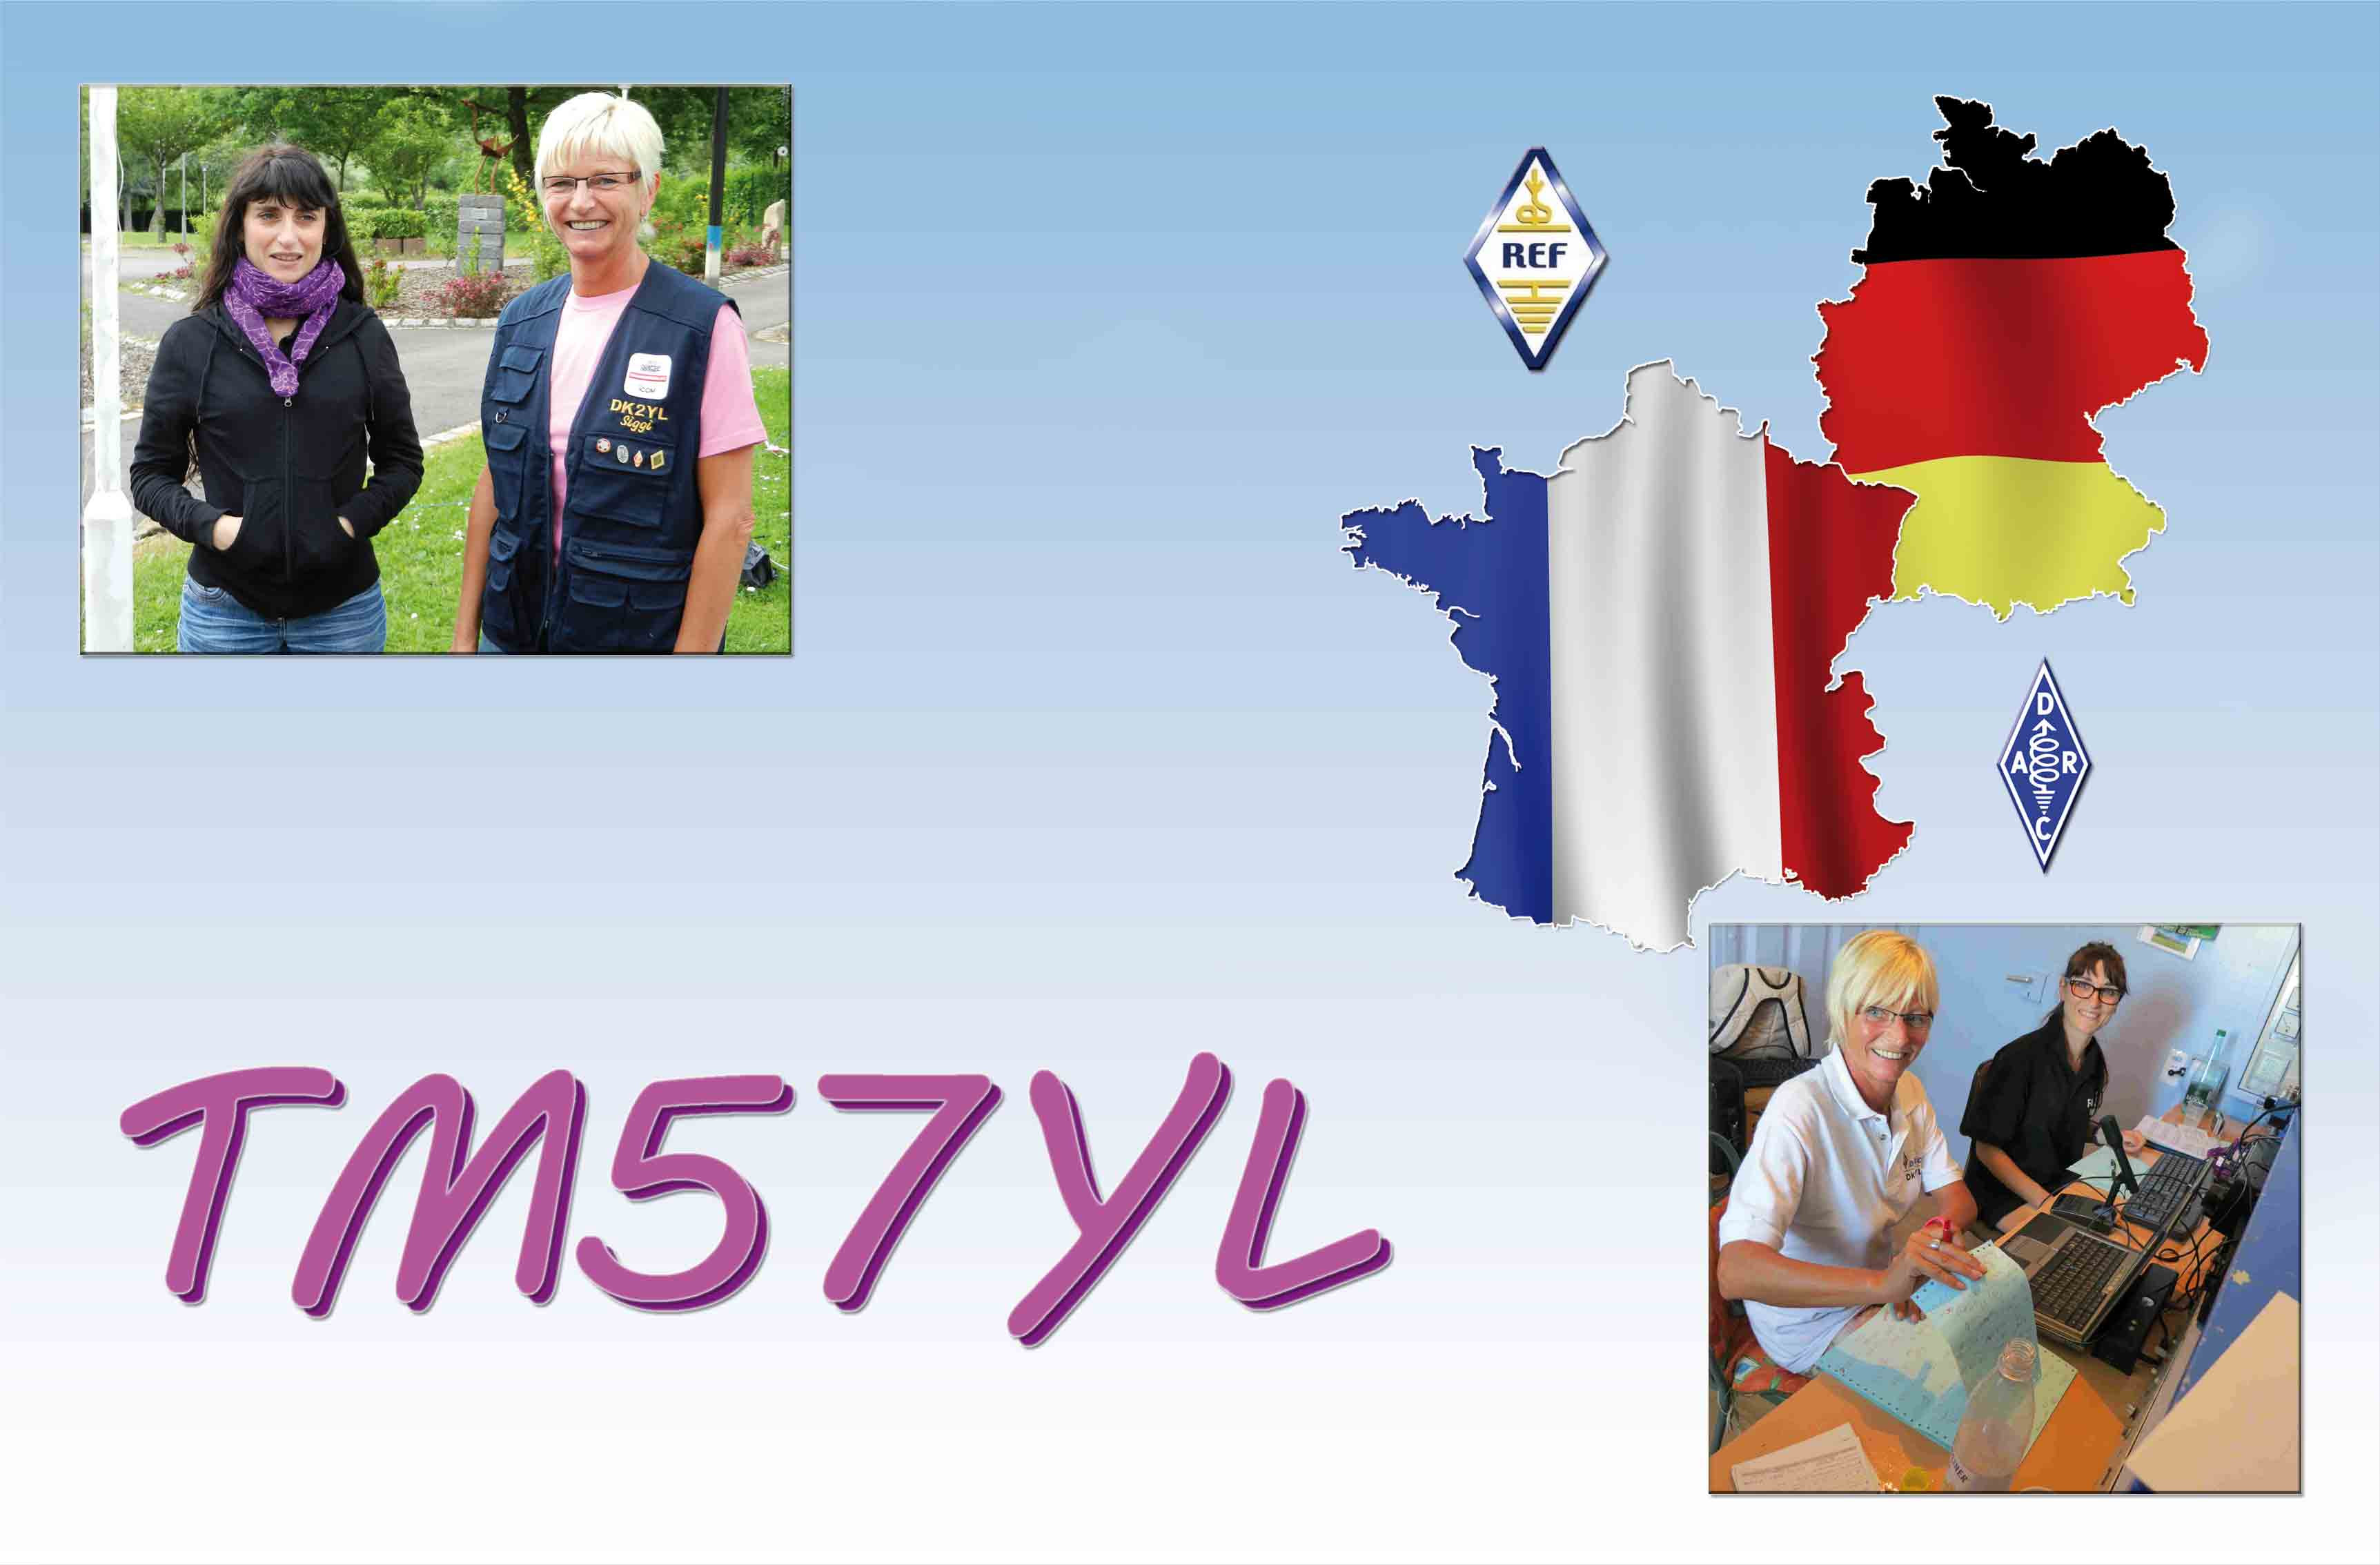 QSL image for TM57YL